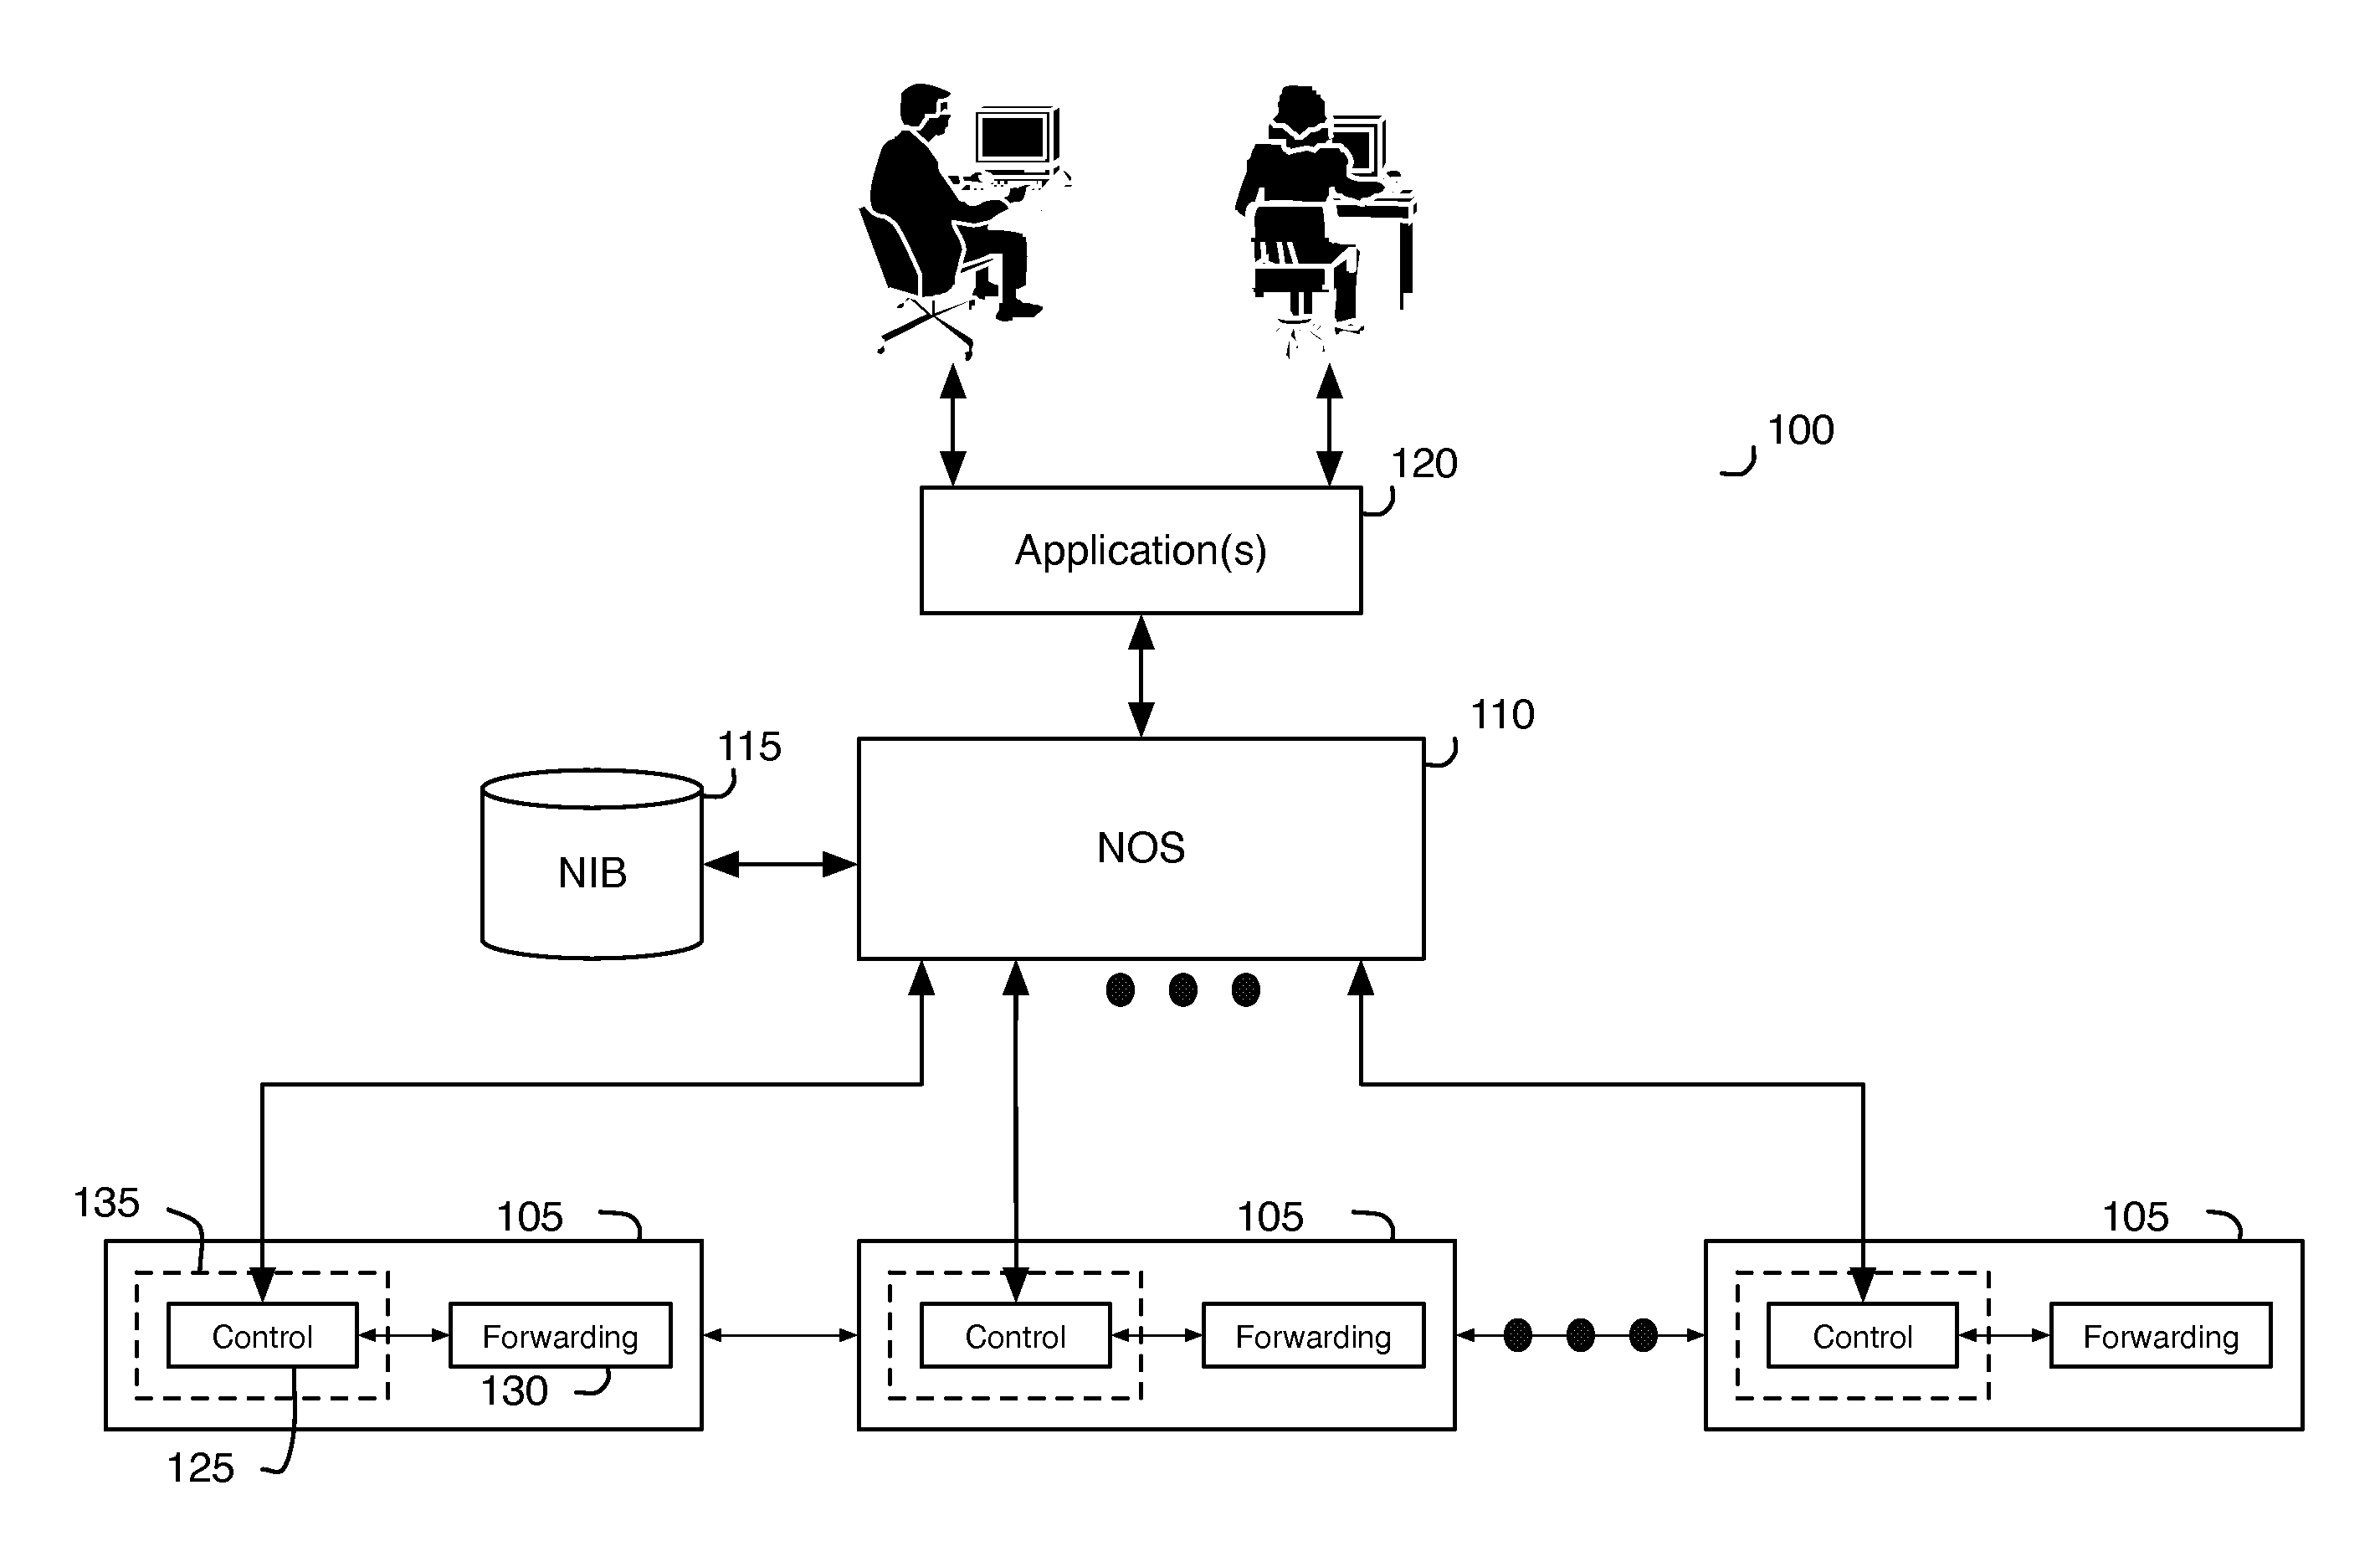 Network virtualization apparatus and method with a table mapping engine